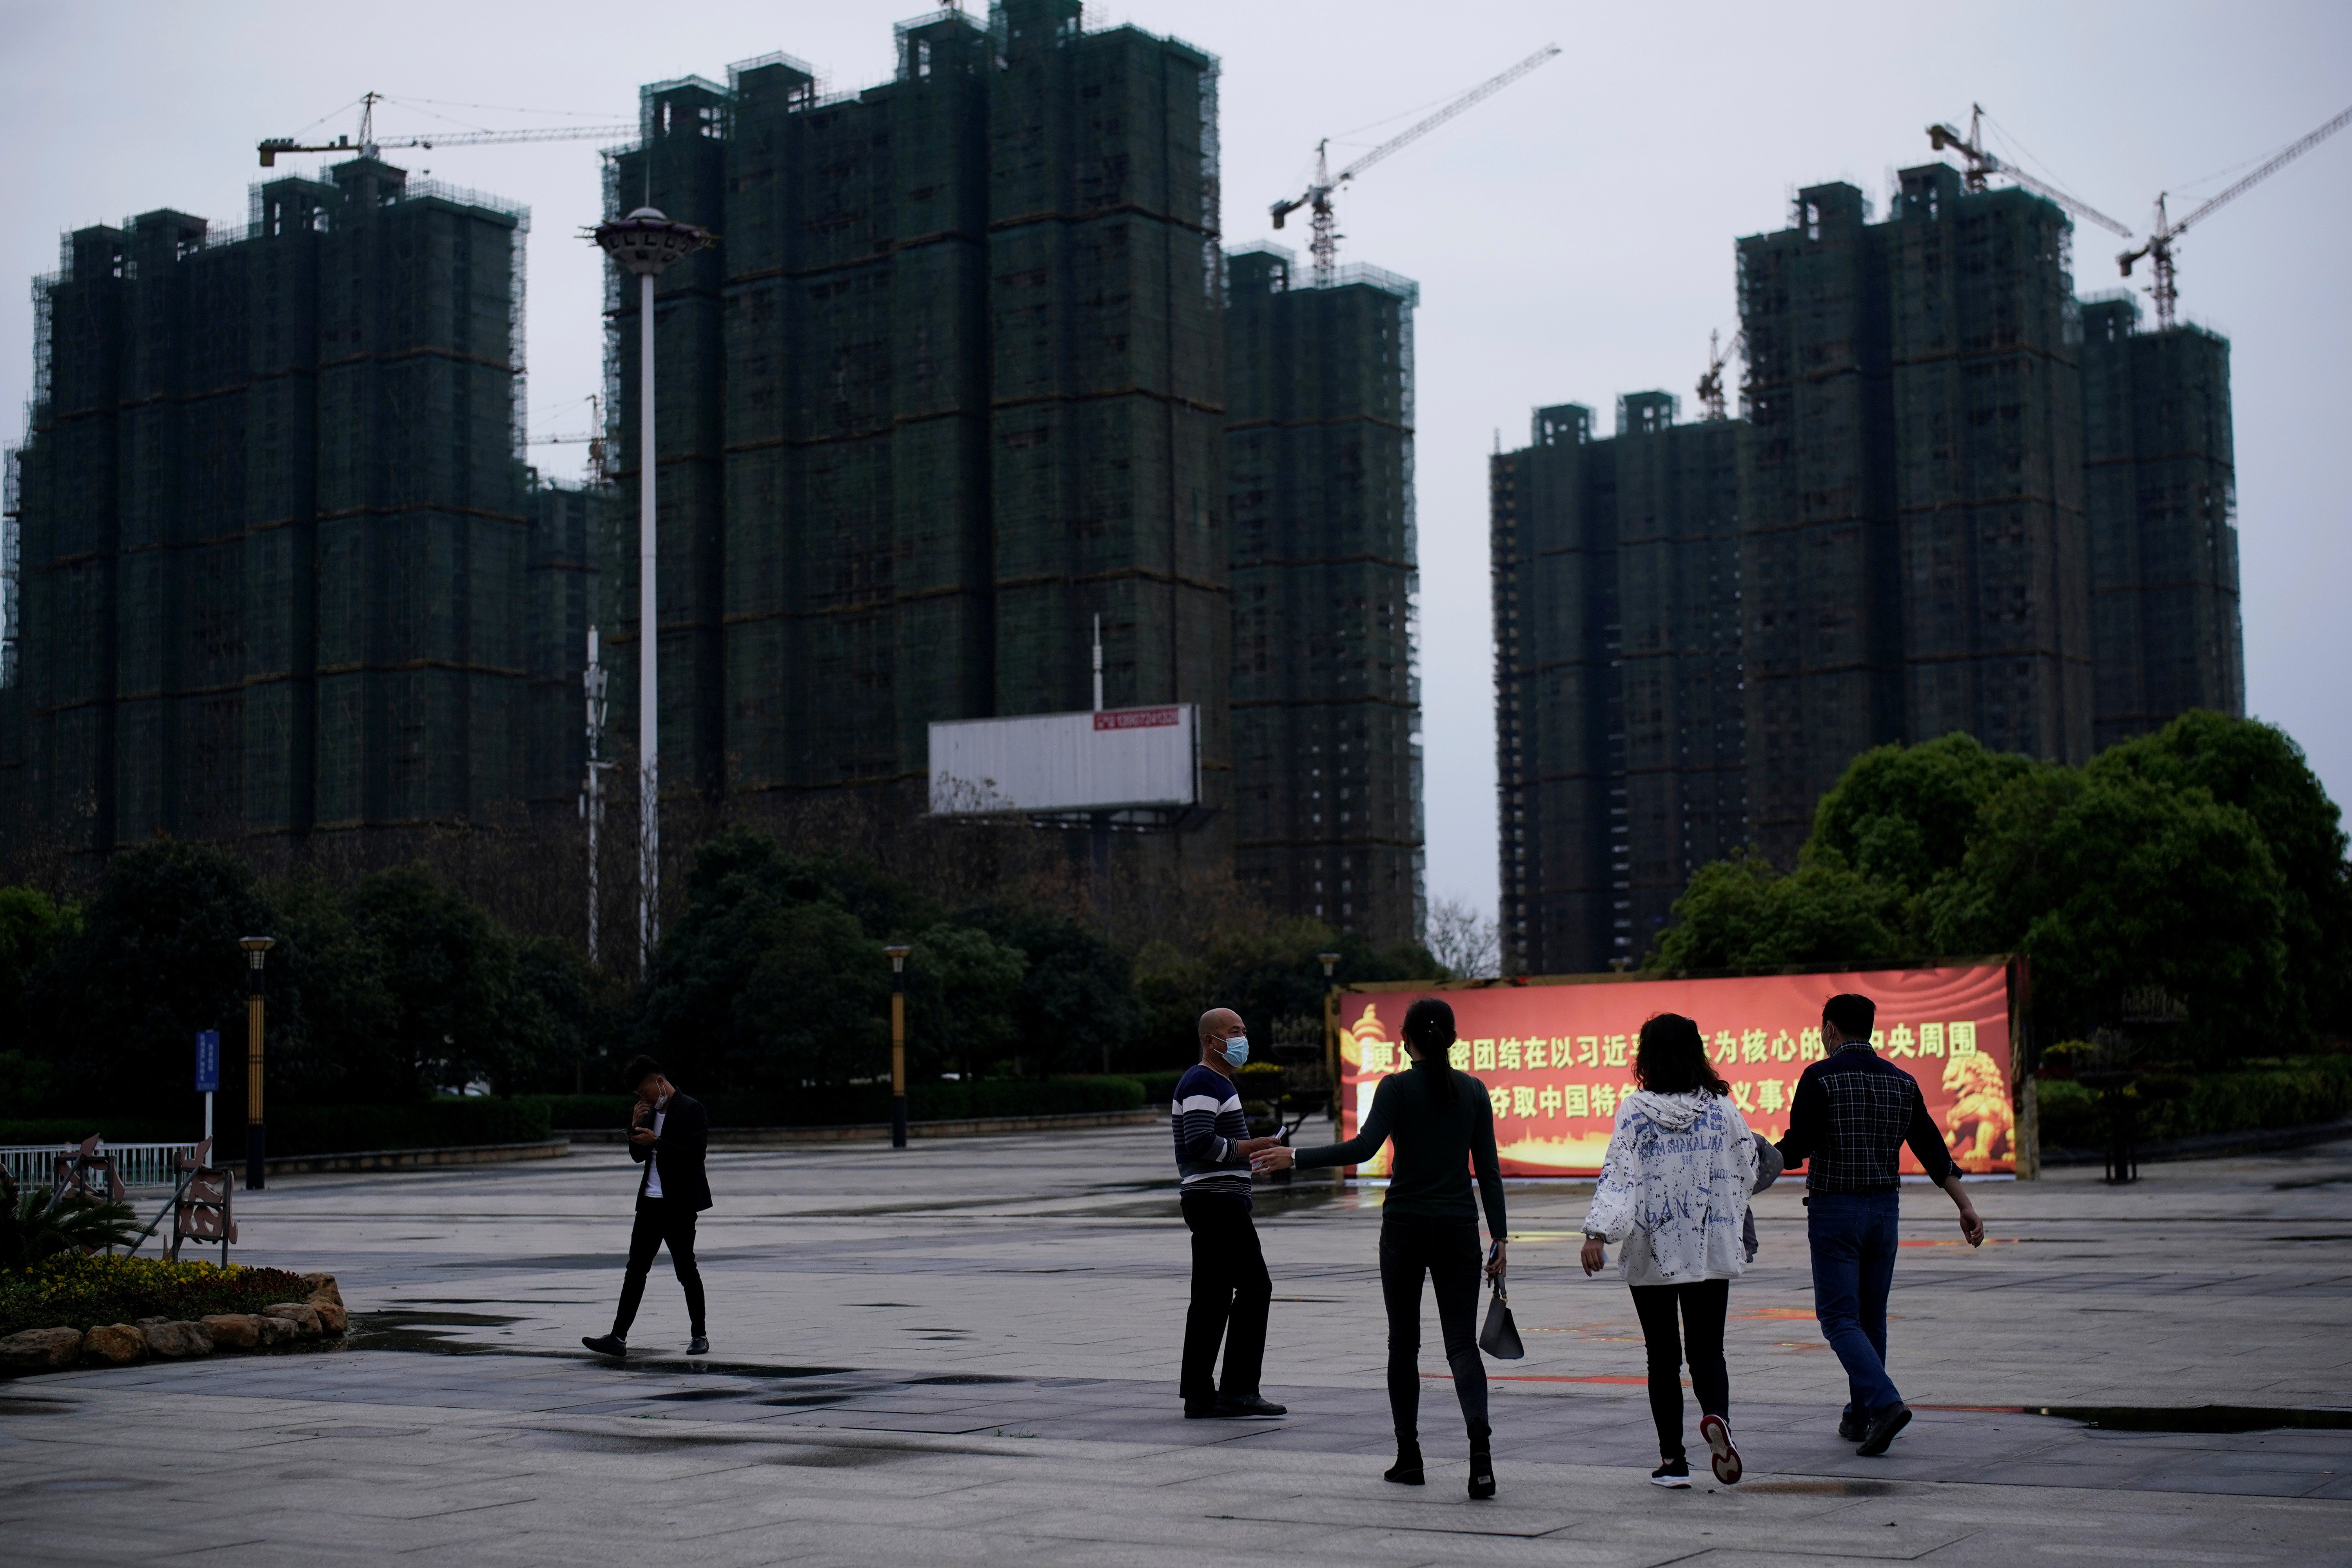 People in face masks near a propaganda sign in front of residential buildings under construction in Xianning, Hubei province, the epicentre of the coronavirus outbreak. Photo: Reuters